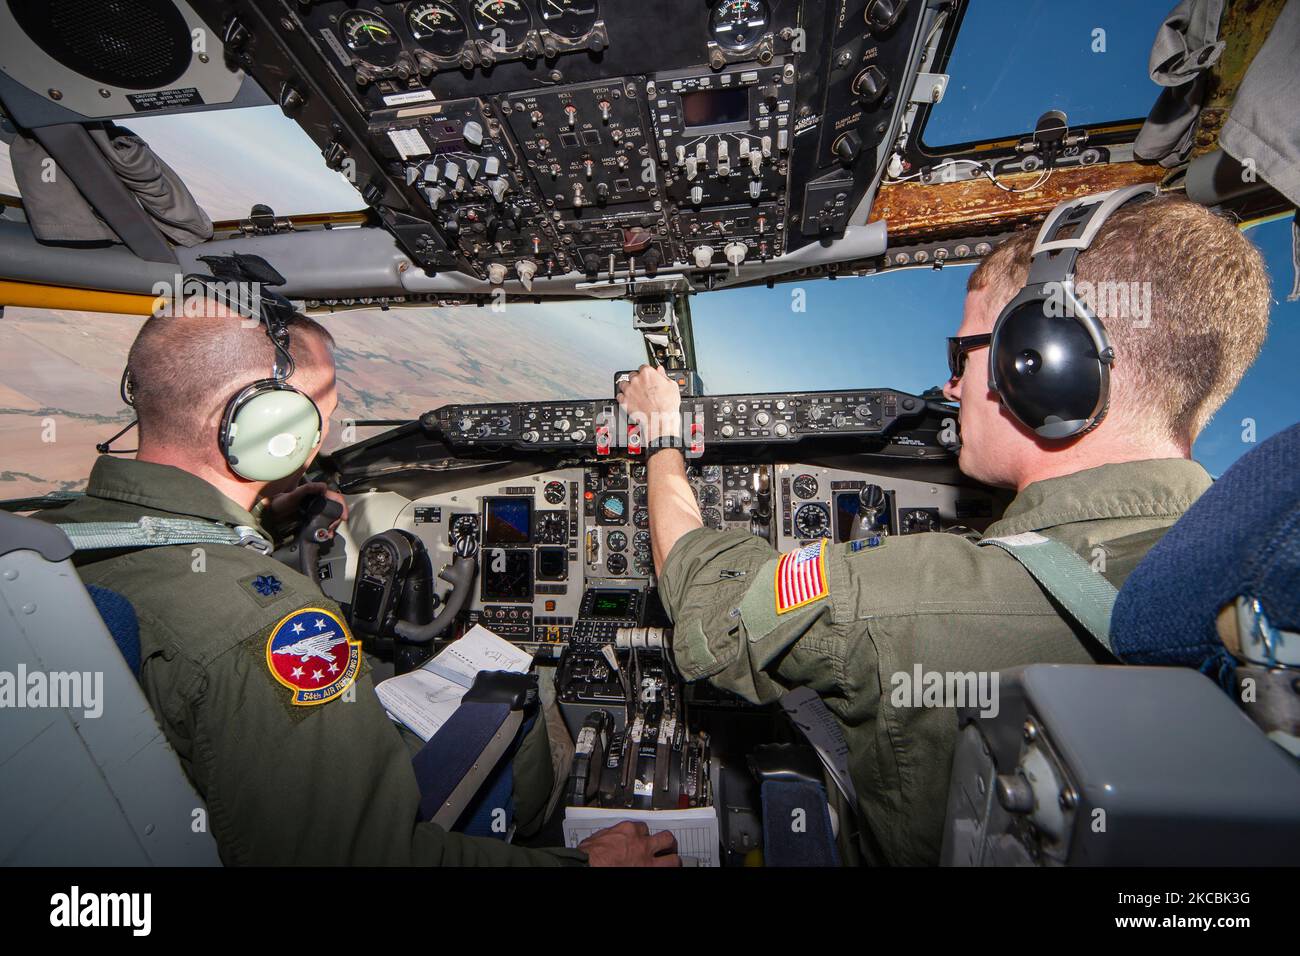 Inside the cockpit of a U.S. Air Force KC-135R during a refueling mission. Stock Photo